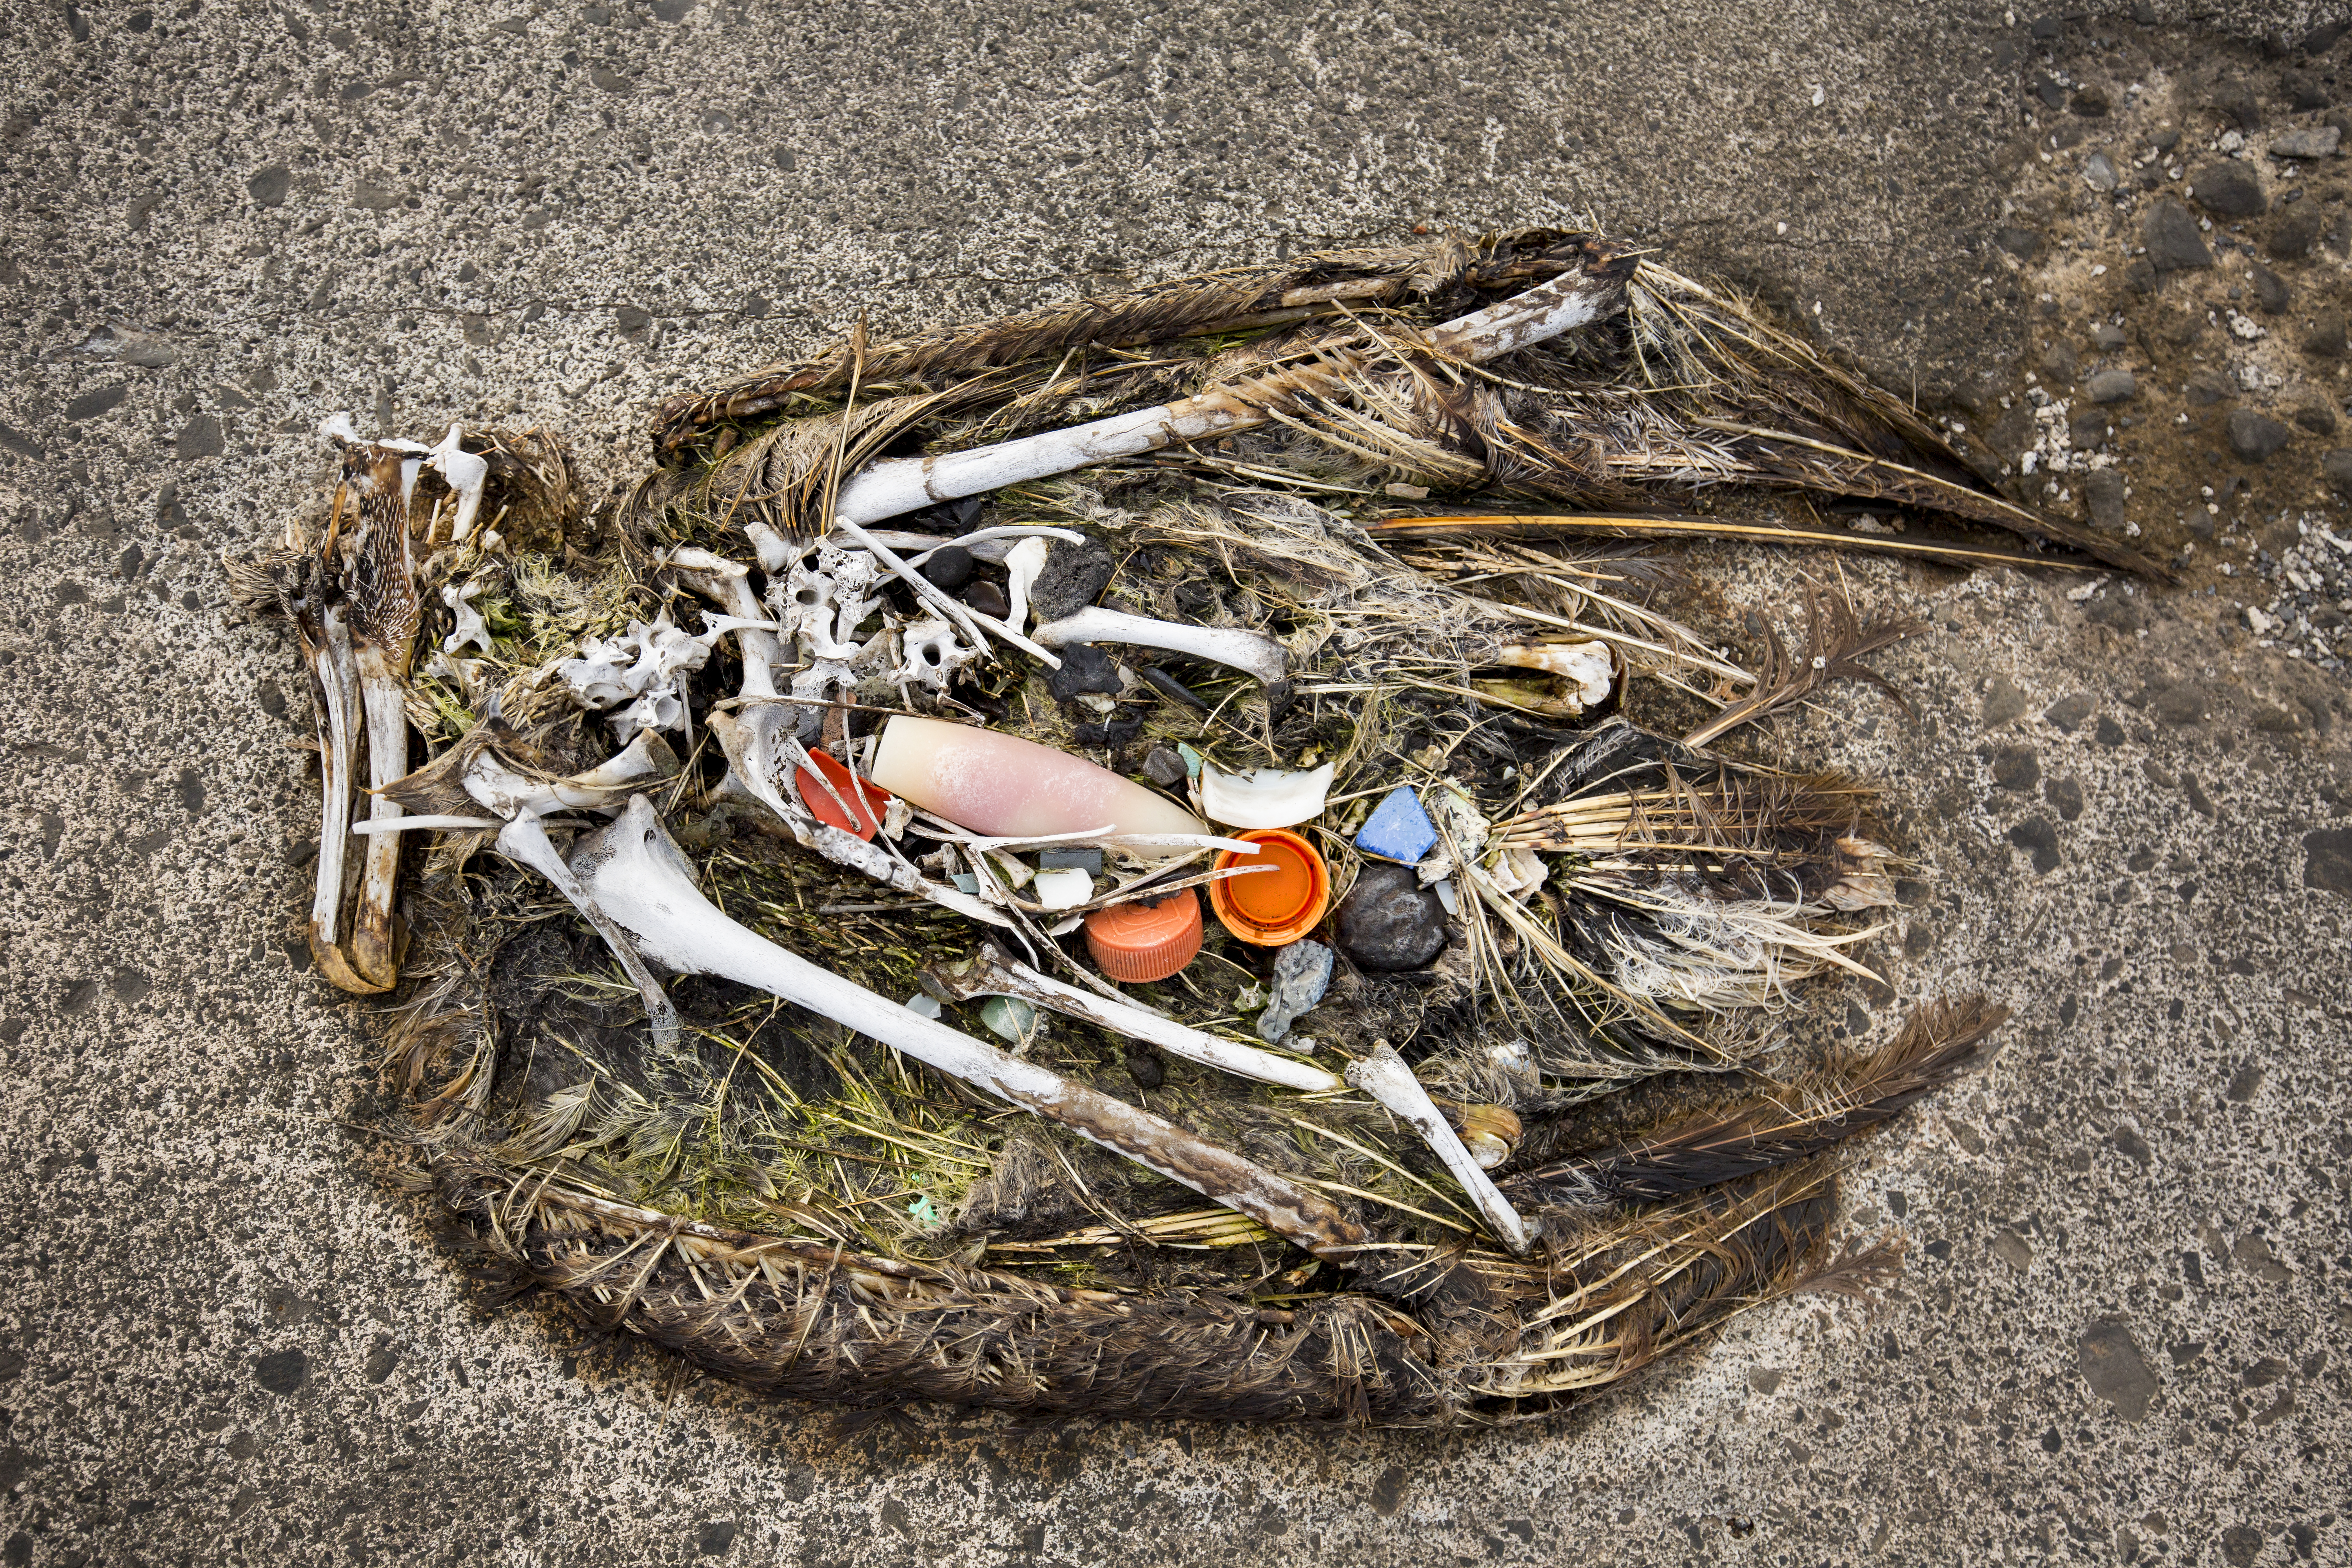 A Laysan albatross lies dead on the sand, its stomach filled with plastic debris that it swallowed.